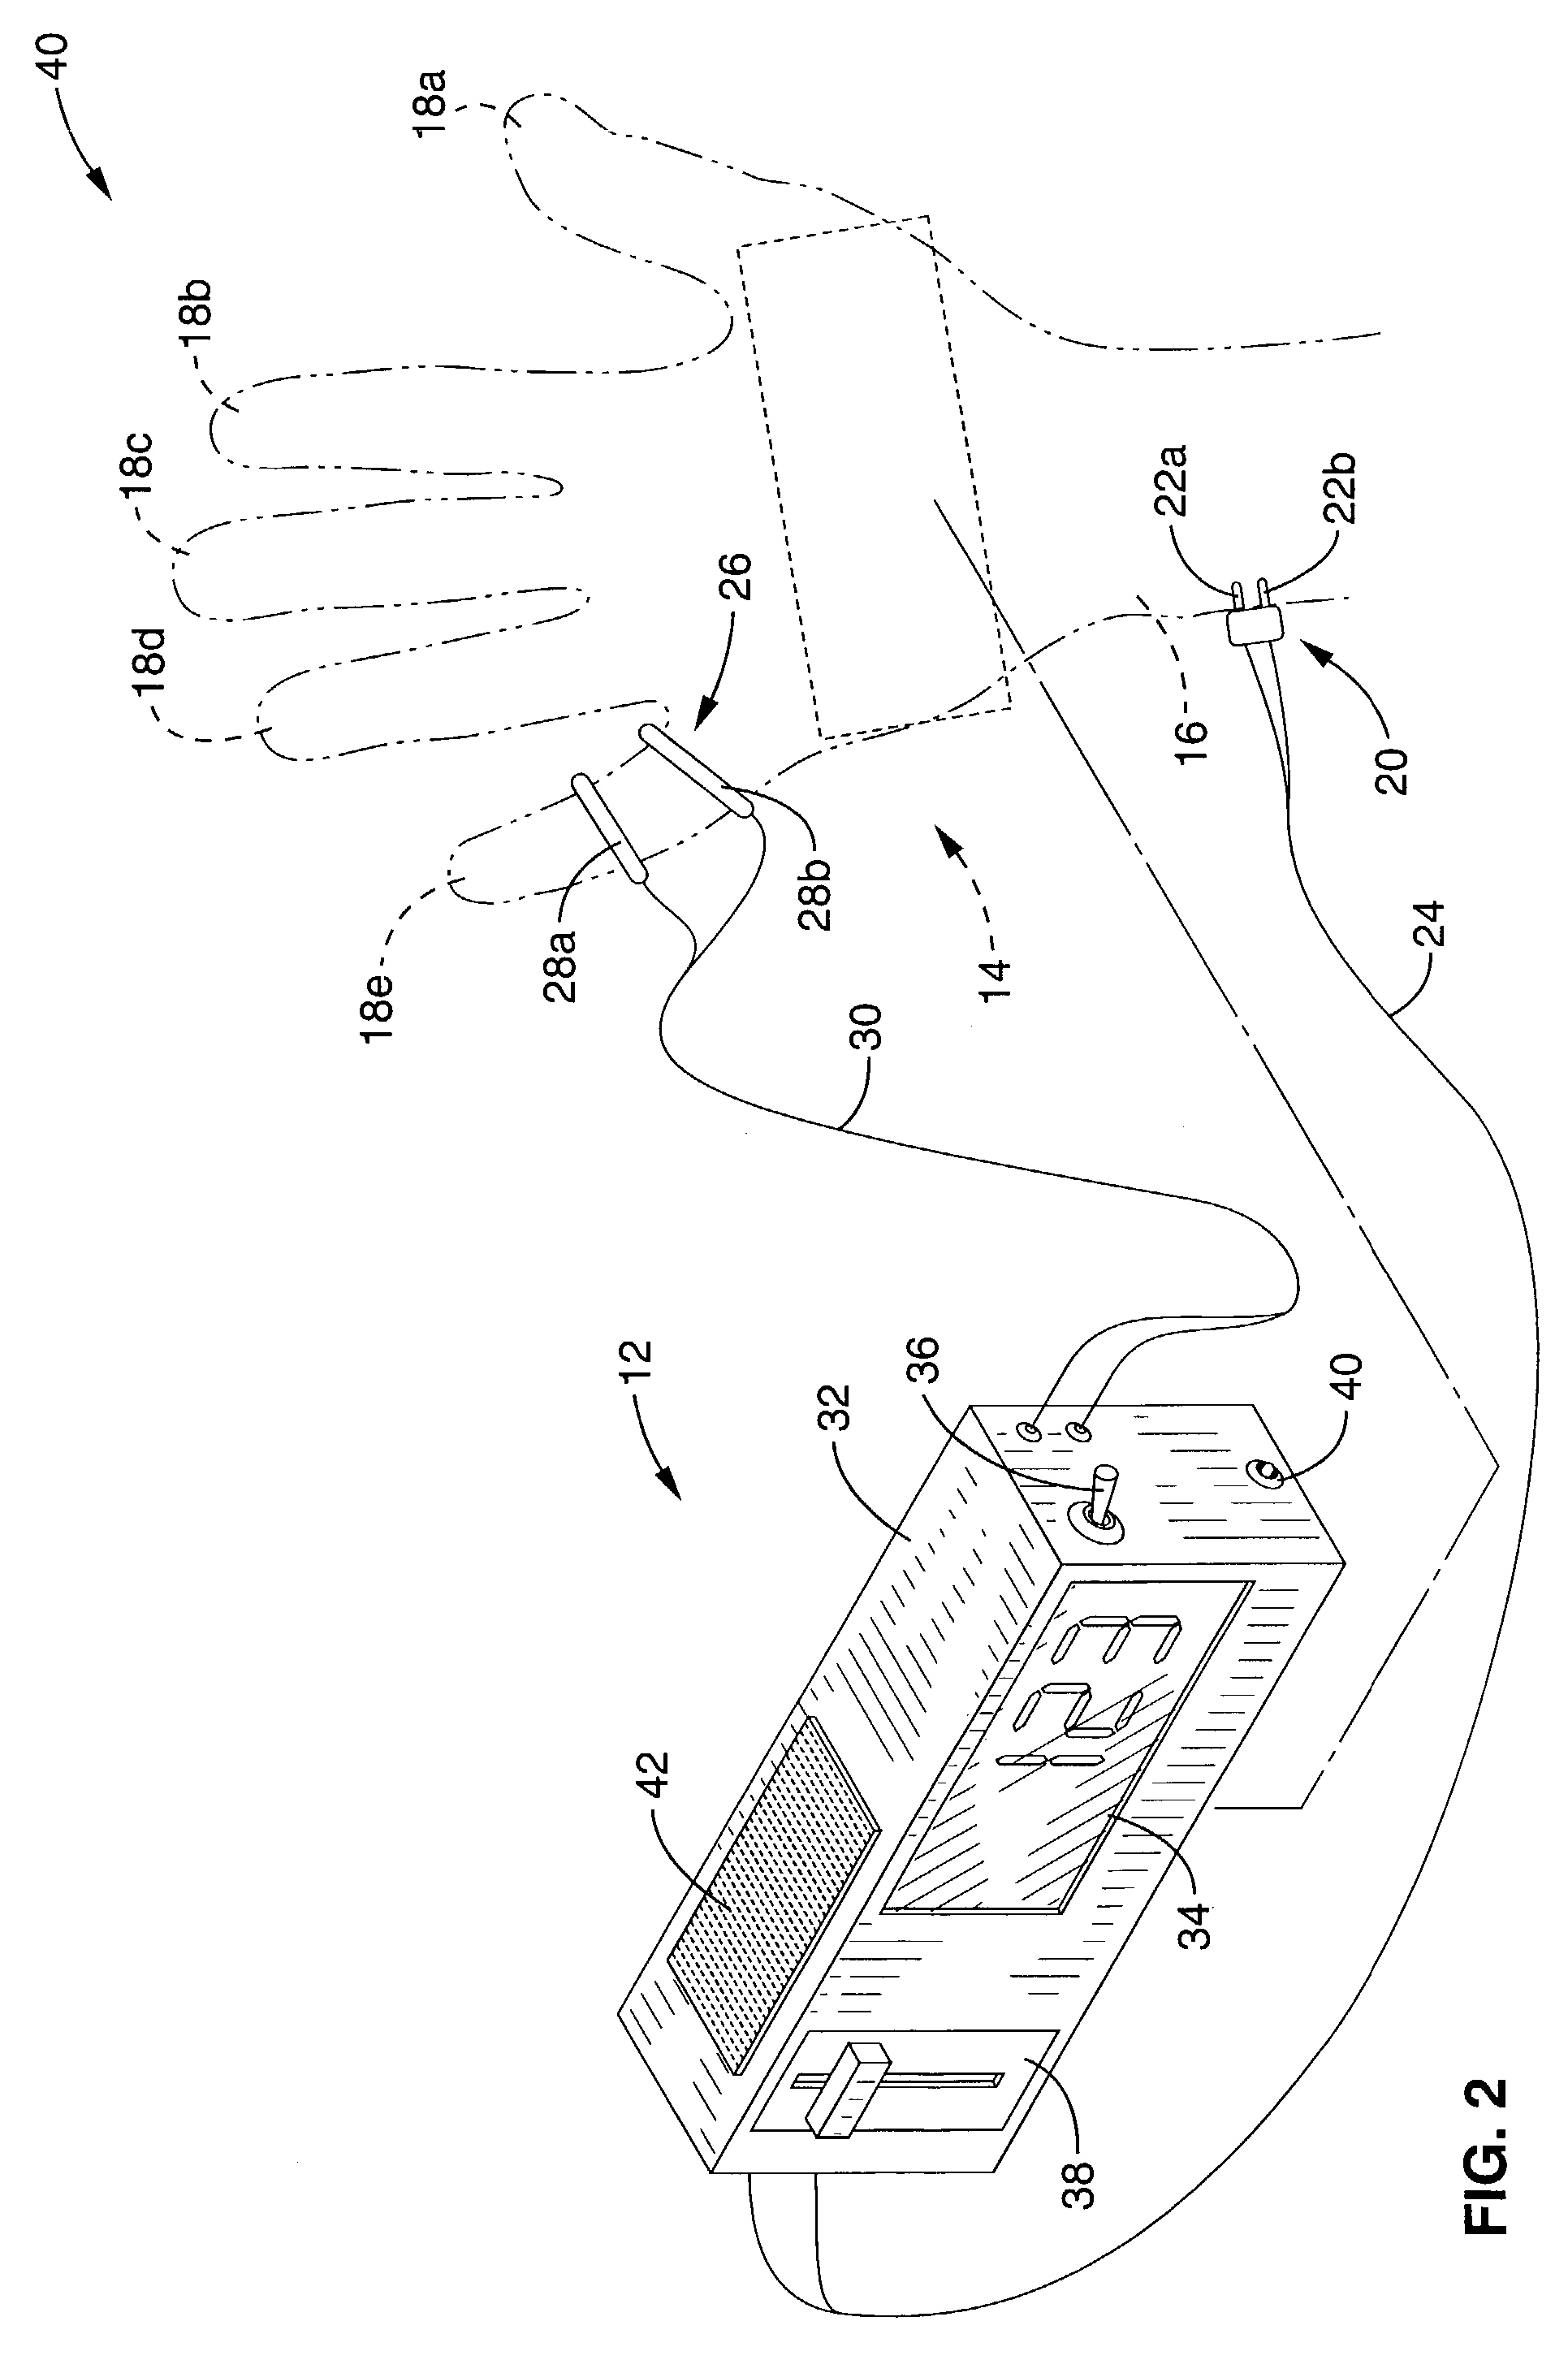 Method and apparatus for self-diagnostic evaluation of nerve sensory latency